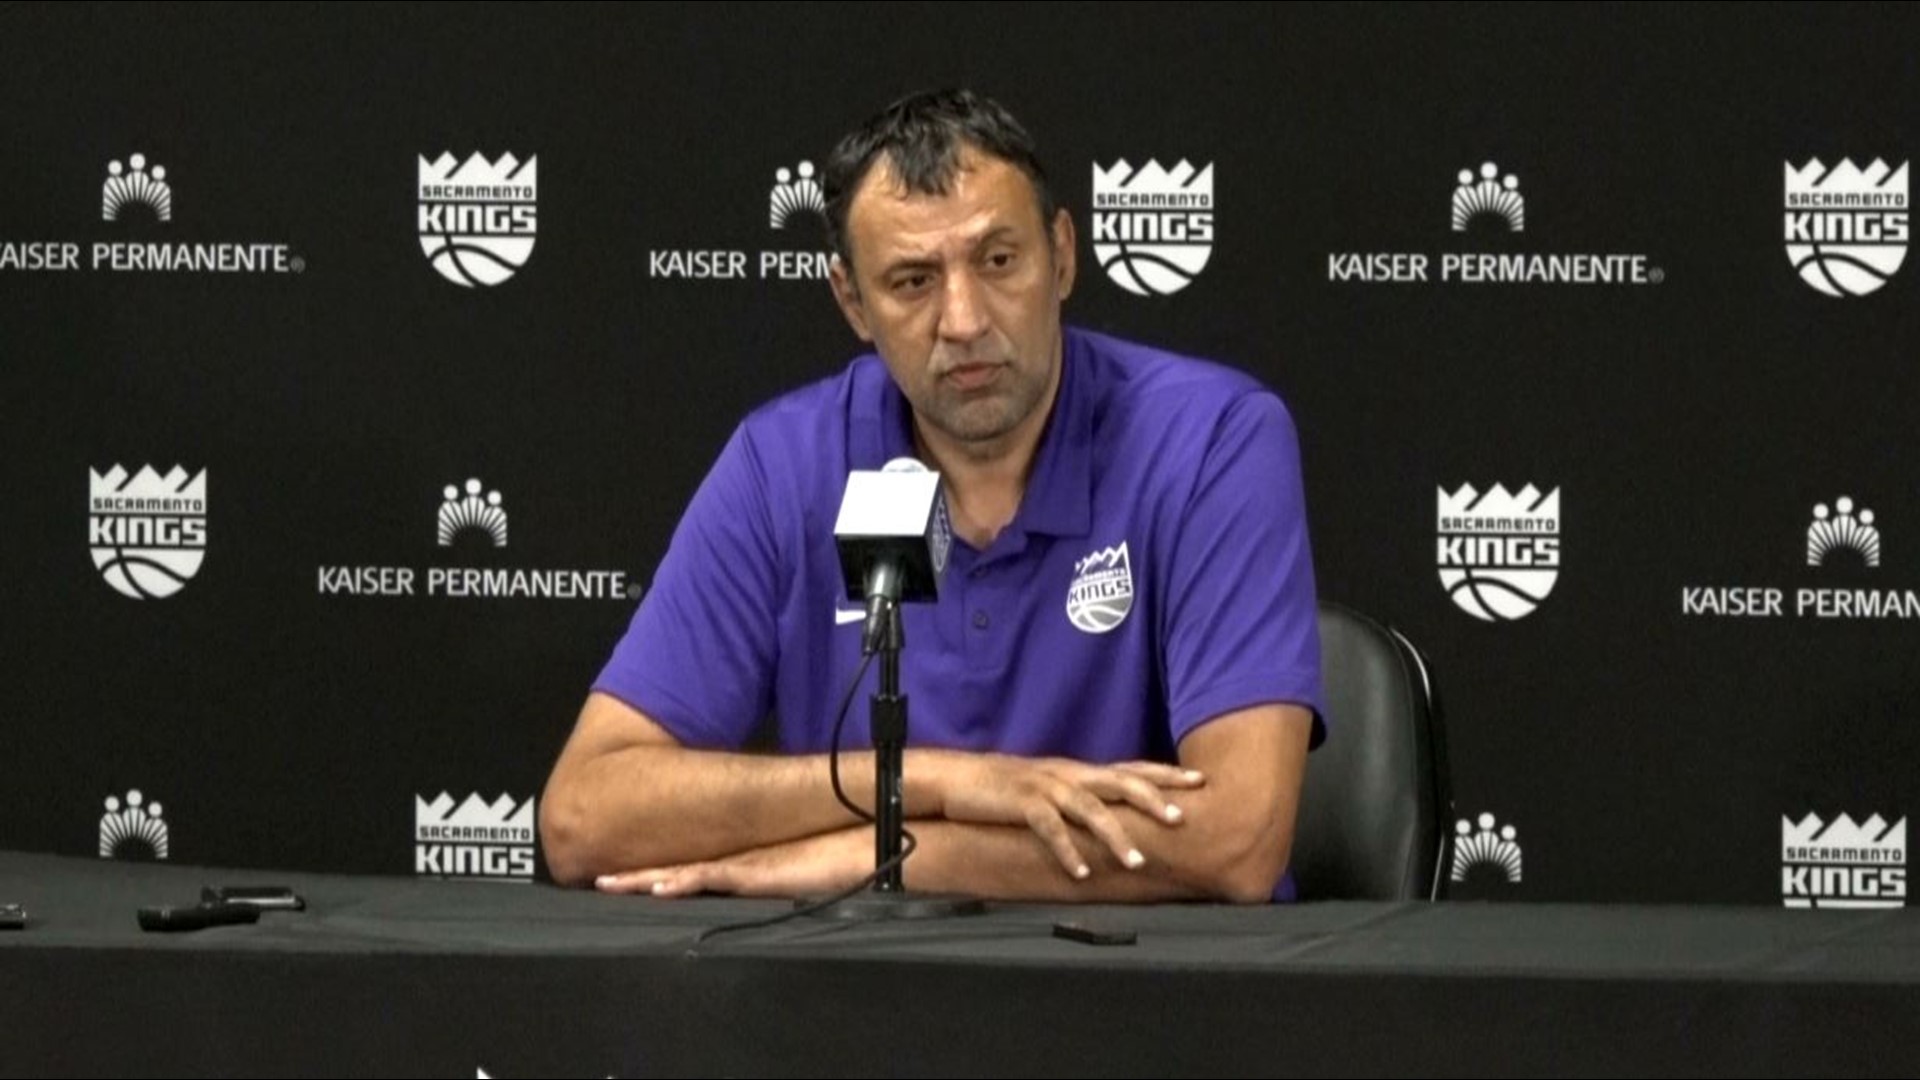 Sacramento Kings general manager Vlade Divac talks about the three picks he made in Thursday’s NBA Draft, where he selected Wyoming’s Justin James with the 40th pick, Virginia’s Kyle Guy 55th following a trade with the Knicks, and Vujan Marinkovic of Serbia taken with the 60th and final pick.